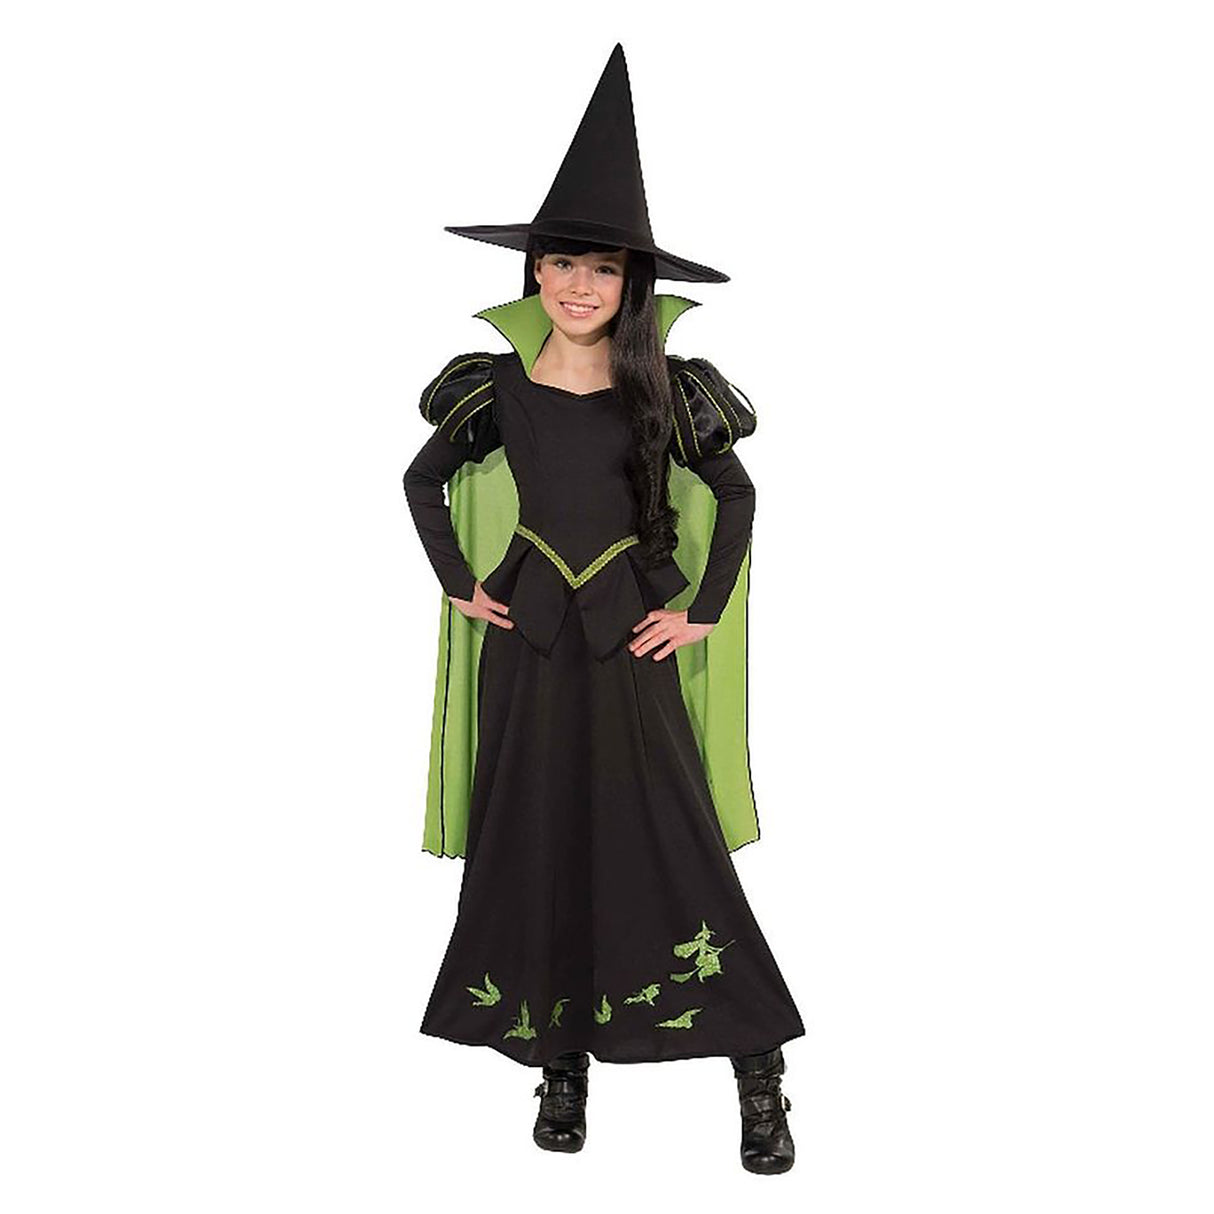 Rubies Wicked Witch of the West The Wizard of Oz Costume, Black (3-4 years)